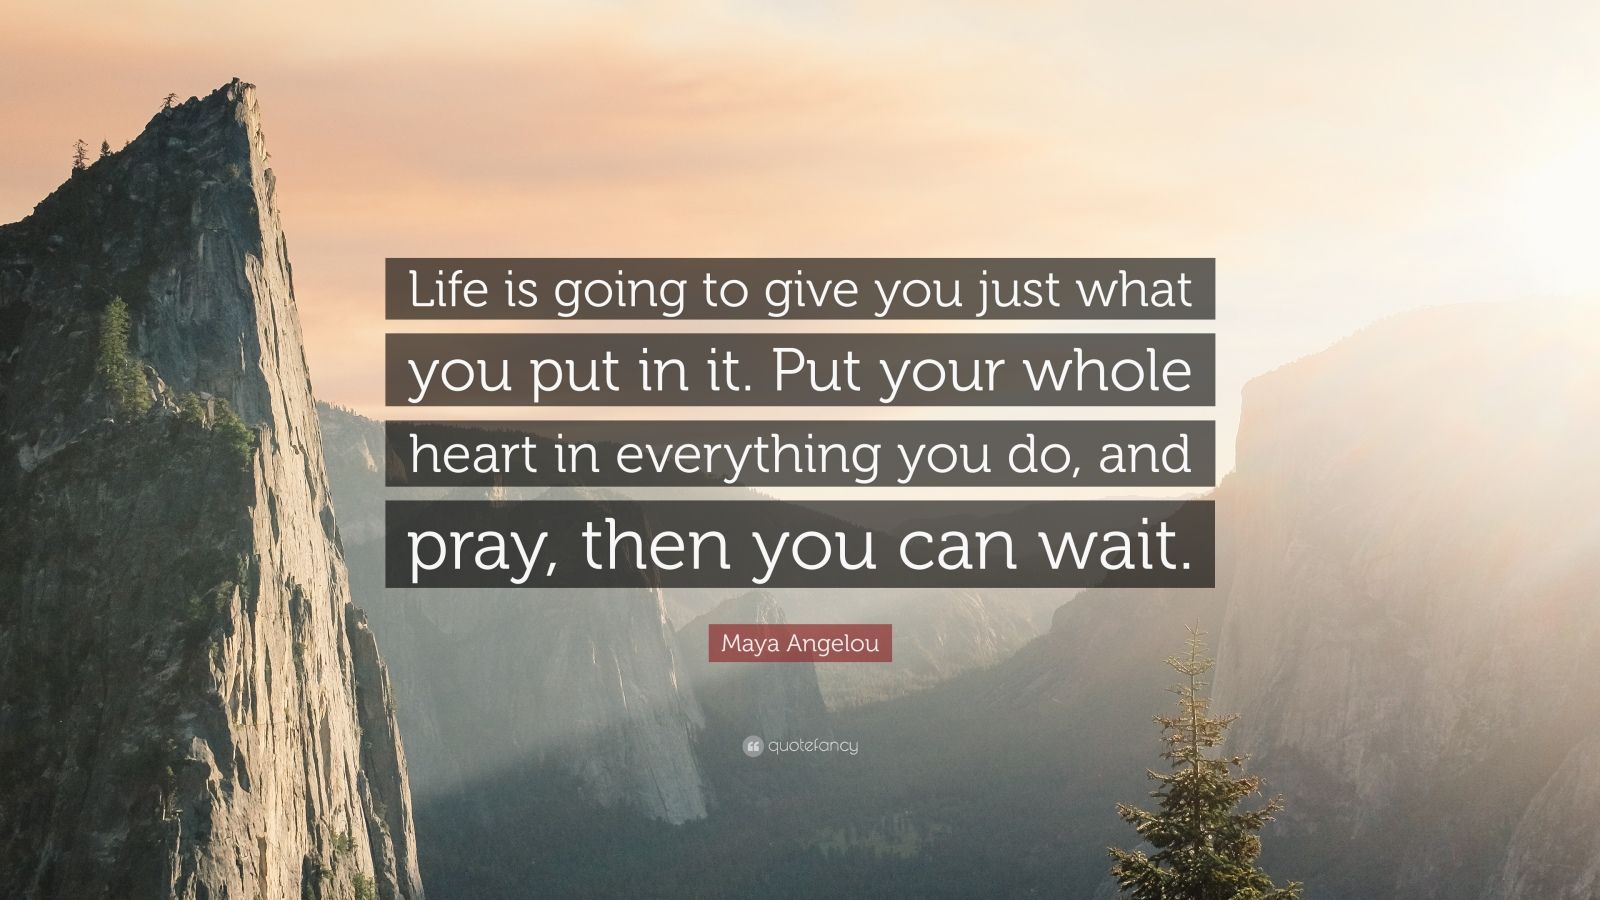 Maya Angelou Quote “Life is going to give you just what you put in